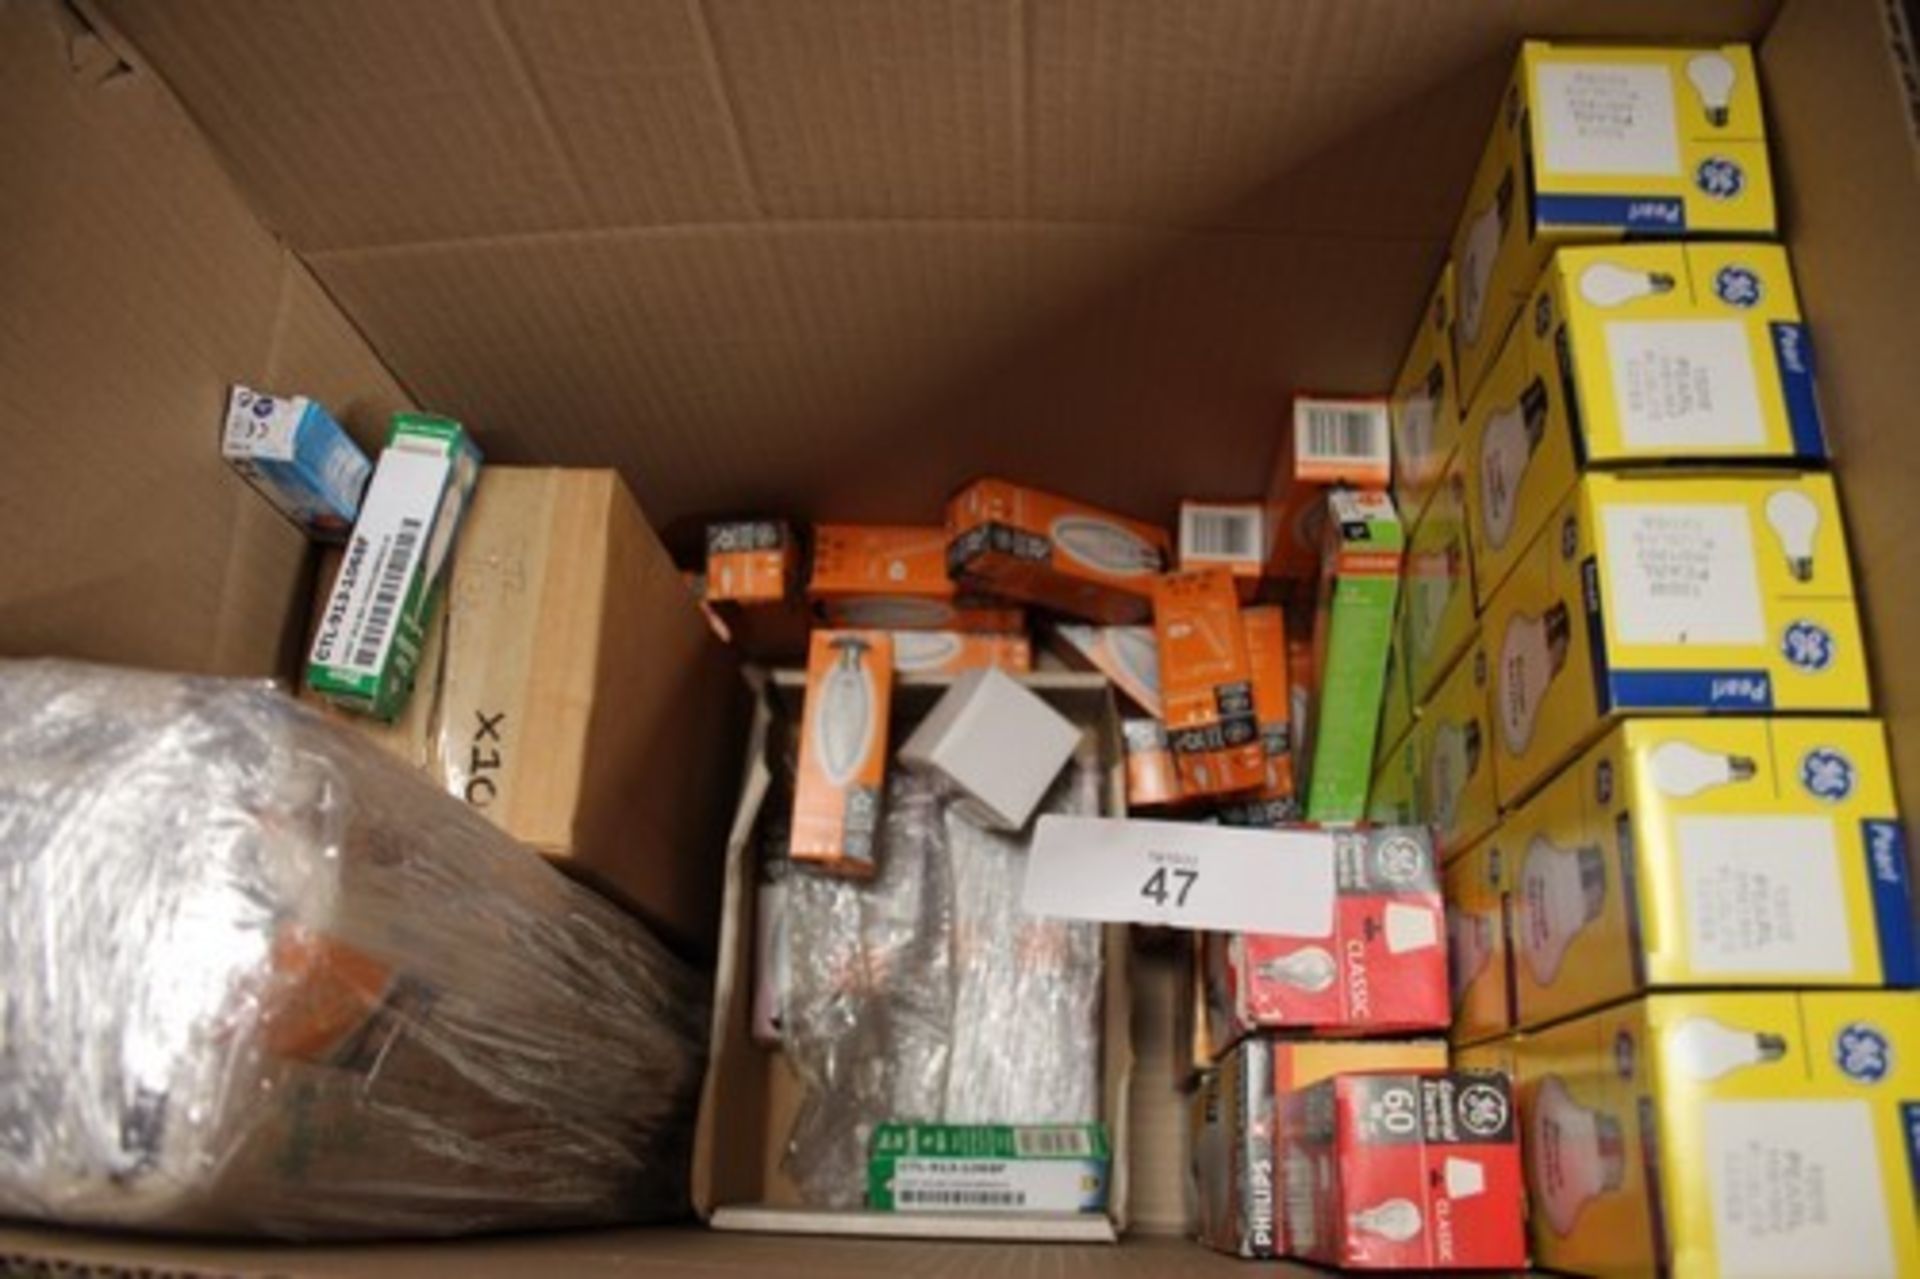 A selection of filament light bulbs including Sylvania, Philips, GE, Crompton, etc. in various sizes - Image 2 of 3